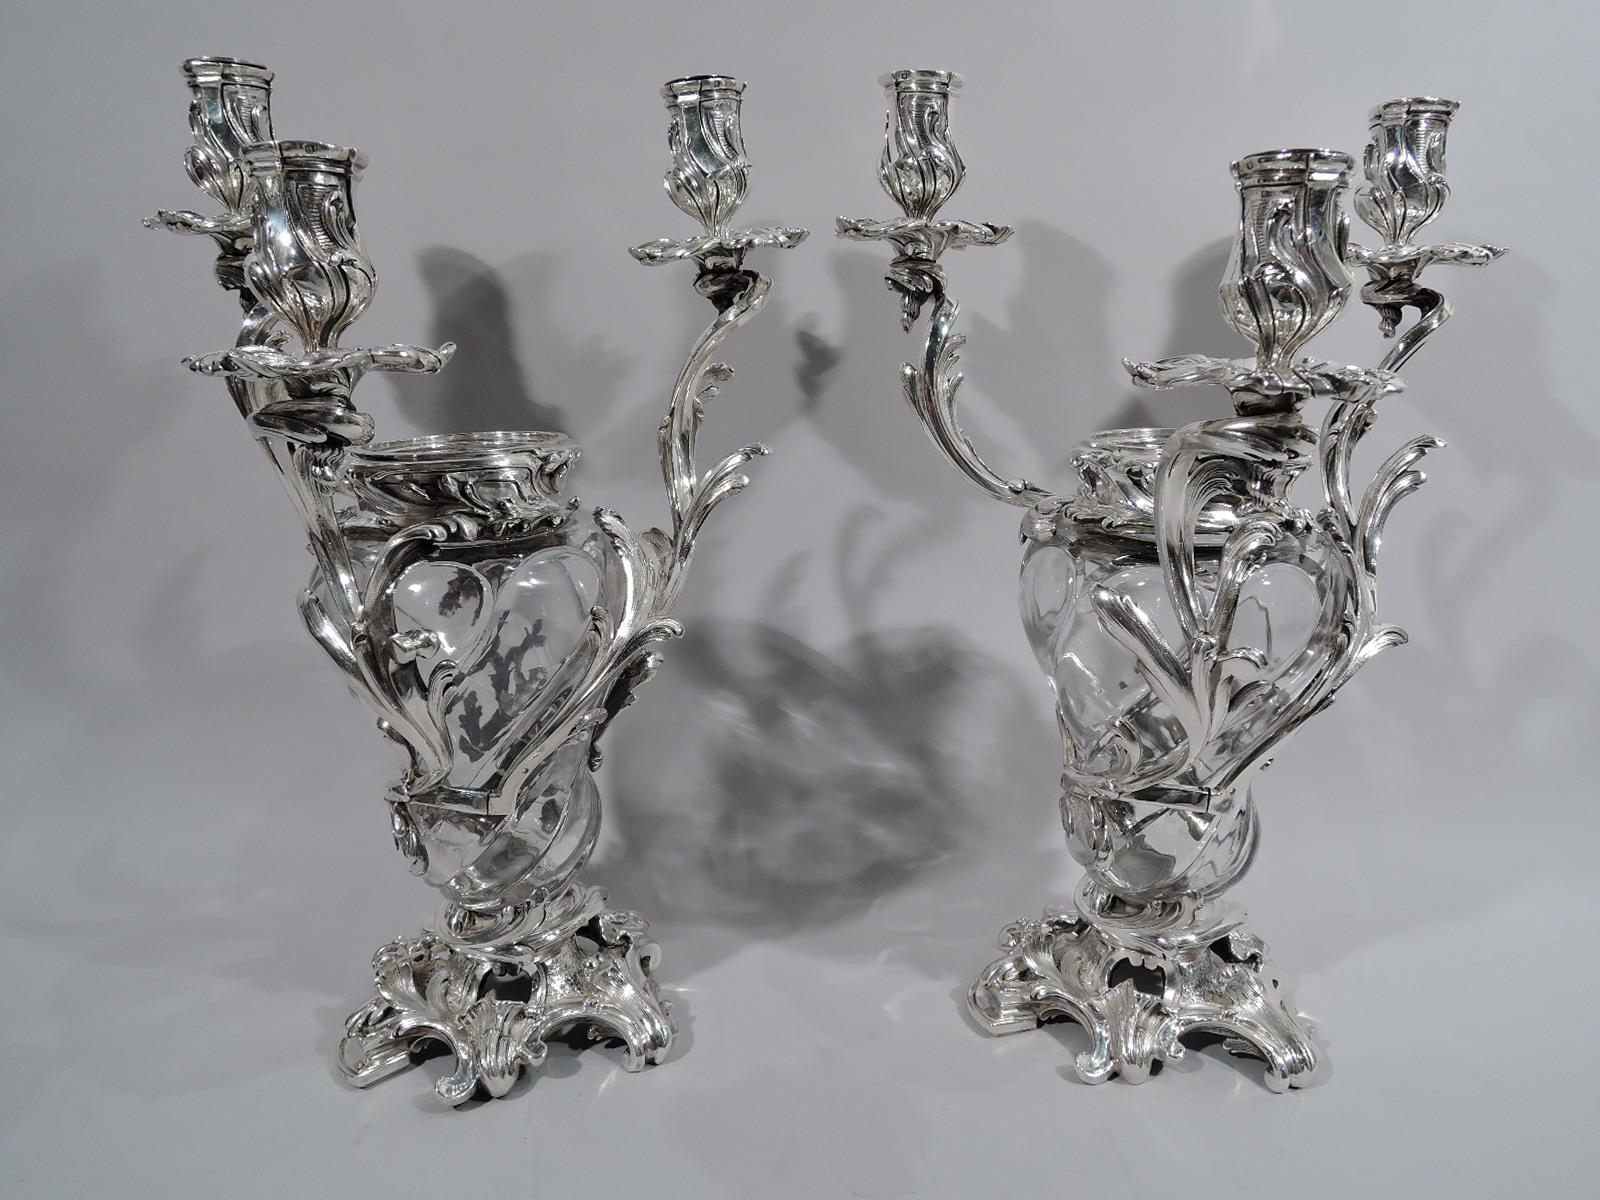 Set of 4 French Belle Époque crystal and silver vase candelabra, circa 1890. Each: Lobed baluster crystal vase with wraparound silver leafing, each terminating in single leaf-wrapped socket with petal wax pan. More leafing applied to rim. Open